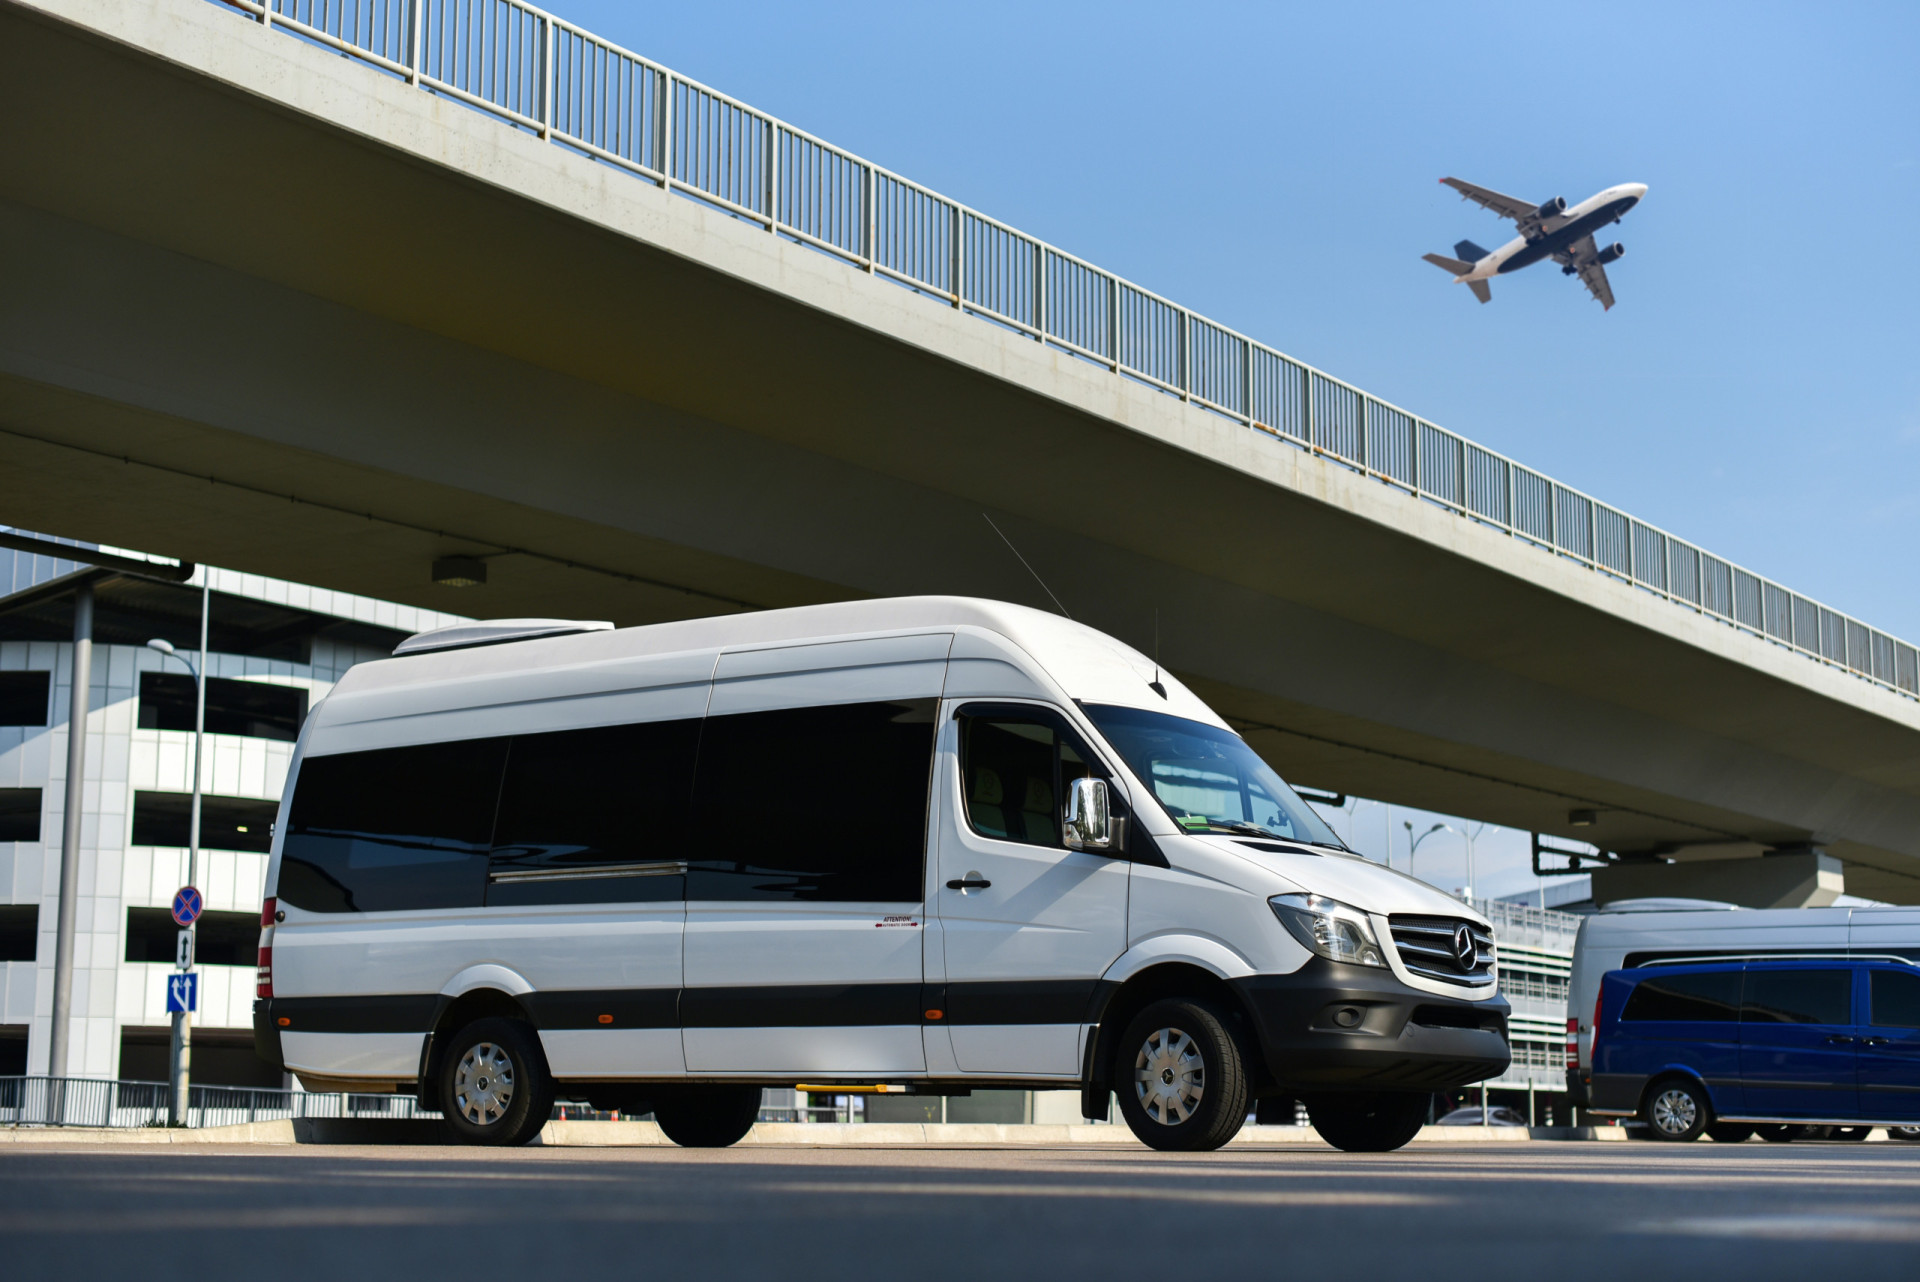 <p>Are airport transfers included? Ending up stranded in the arrivals hall is the last thing you need, especially after a long-haul flight. And you'll pay a premium to flag down a taxi. Make sure transfers are round trip as well.</p><p>You may also like:<a href="https://www.starsinsider.com/n/423240?utm_source=msn.com&utm_medium=display&utm_campaign=referral_description&utm_content=562106en-en"> Nasty comments celebs made about their exes</a></p>